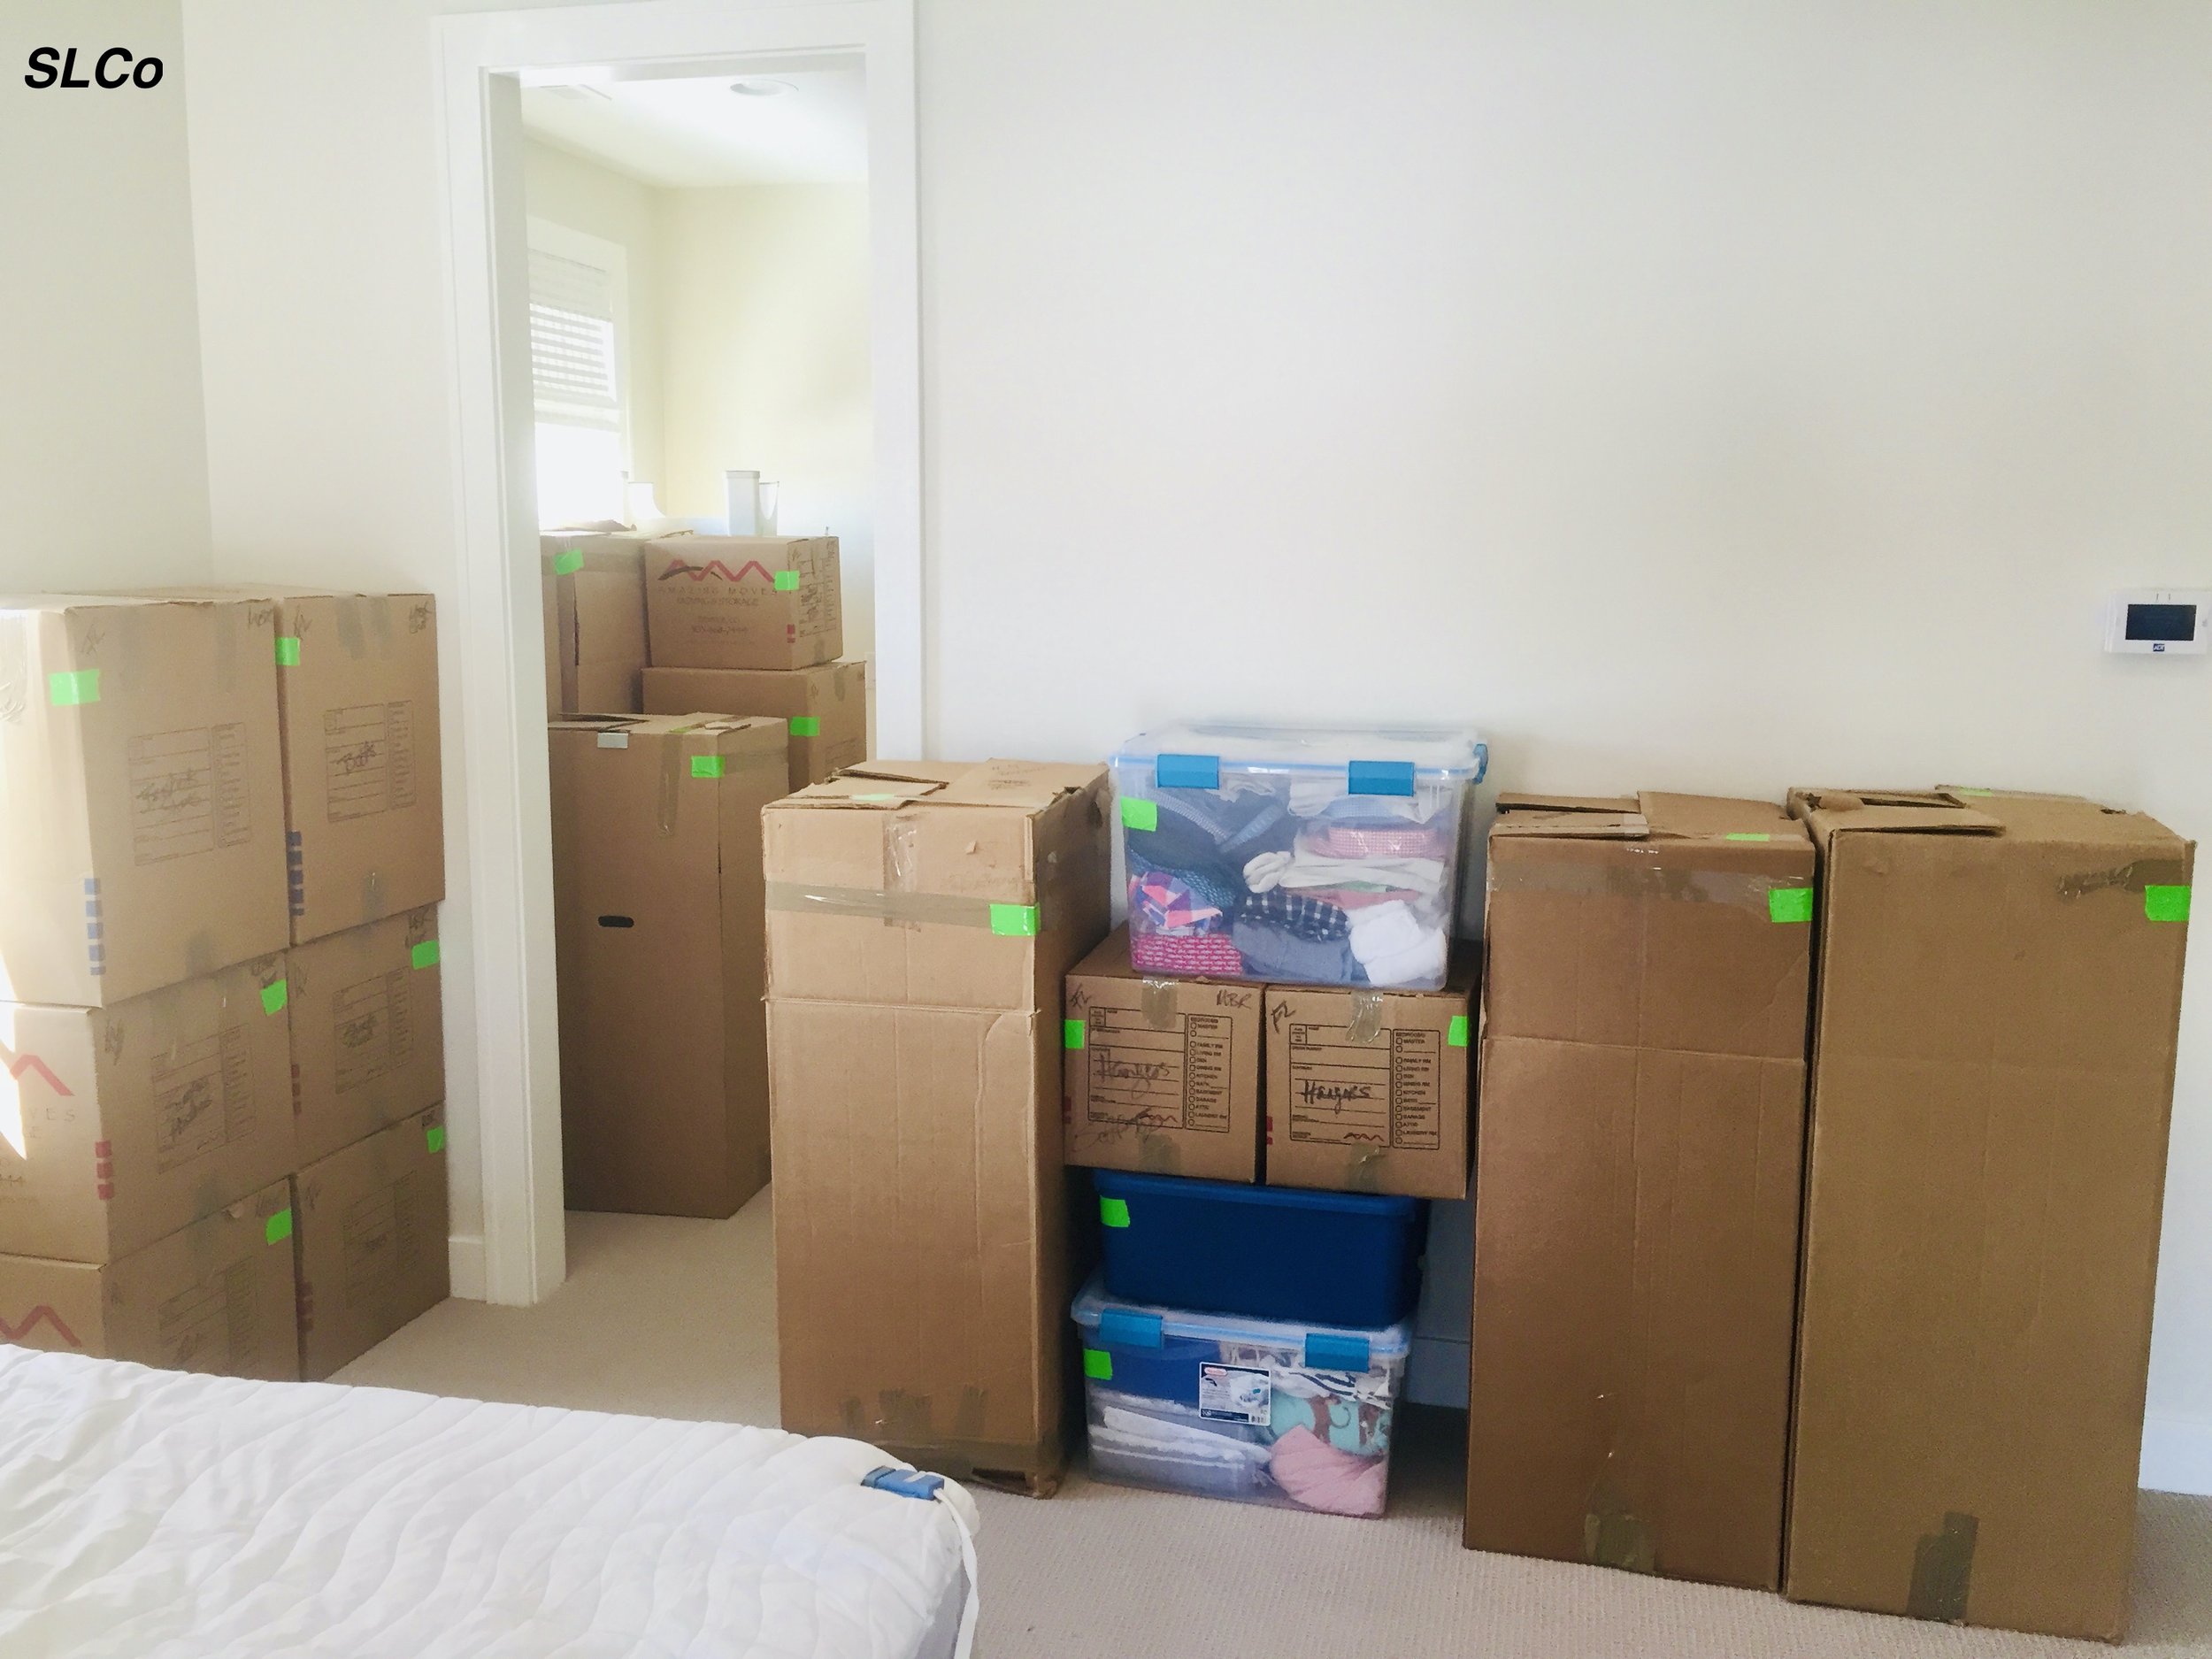 Bedroom with boxes packed against a wall and all boxes labeled.